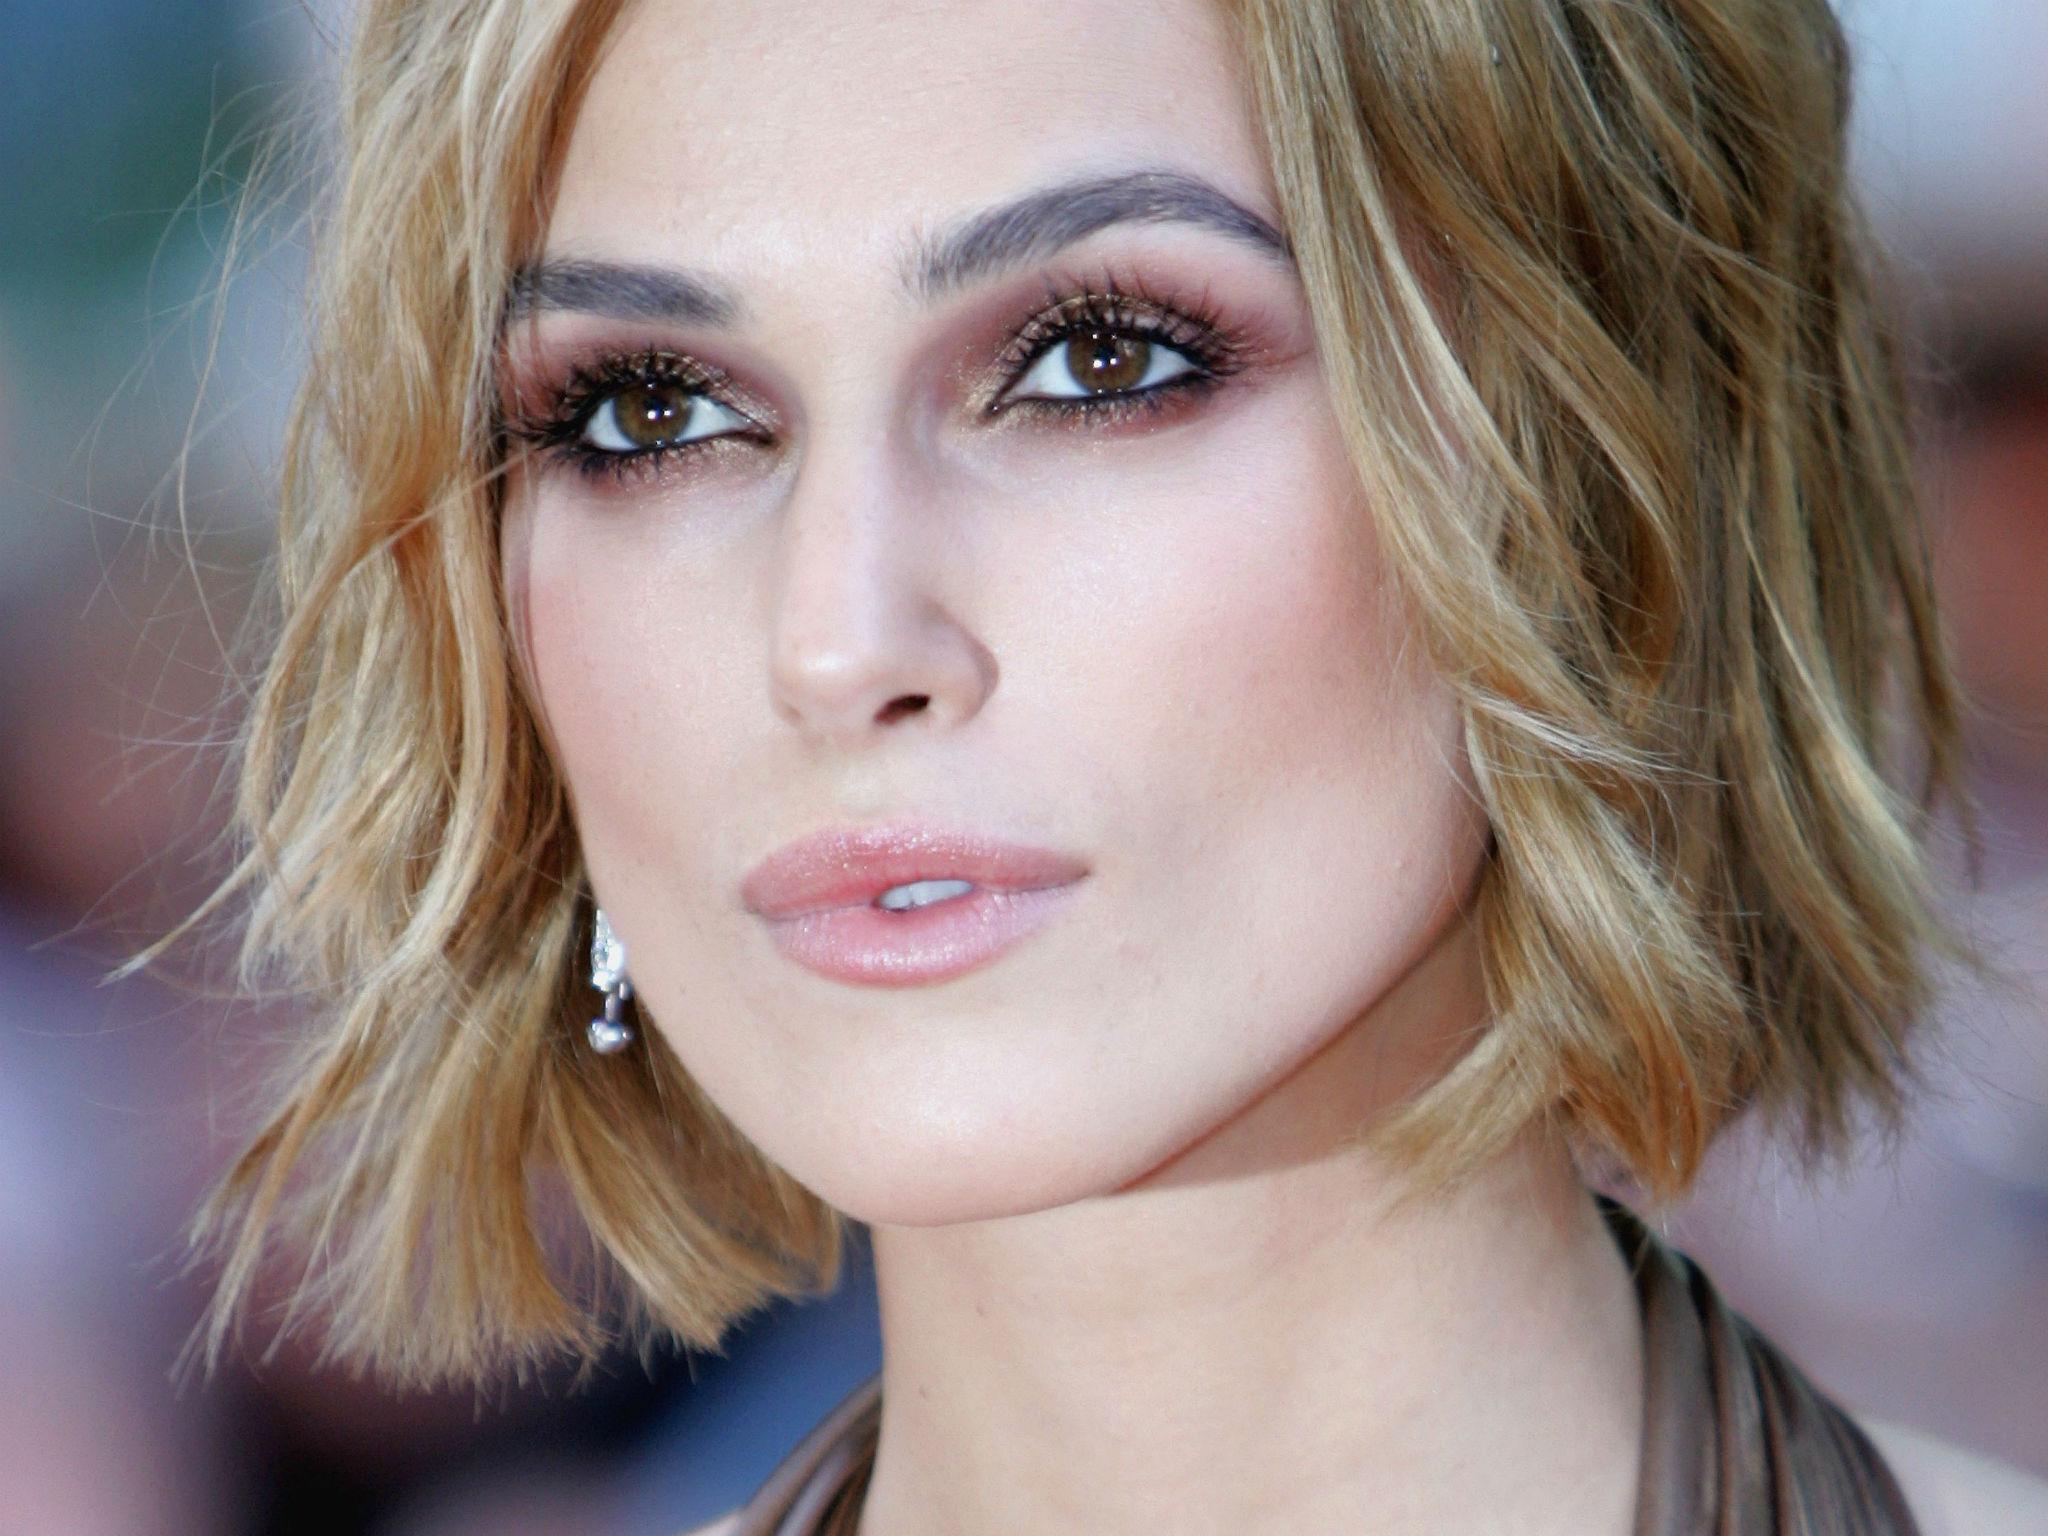 Keira Knightley has proved a hit for Disney before in the Pirates of the Caribbean franchise